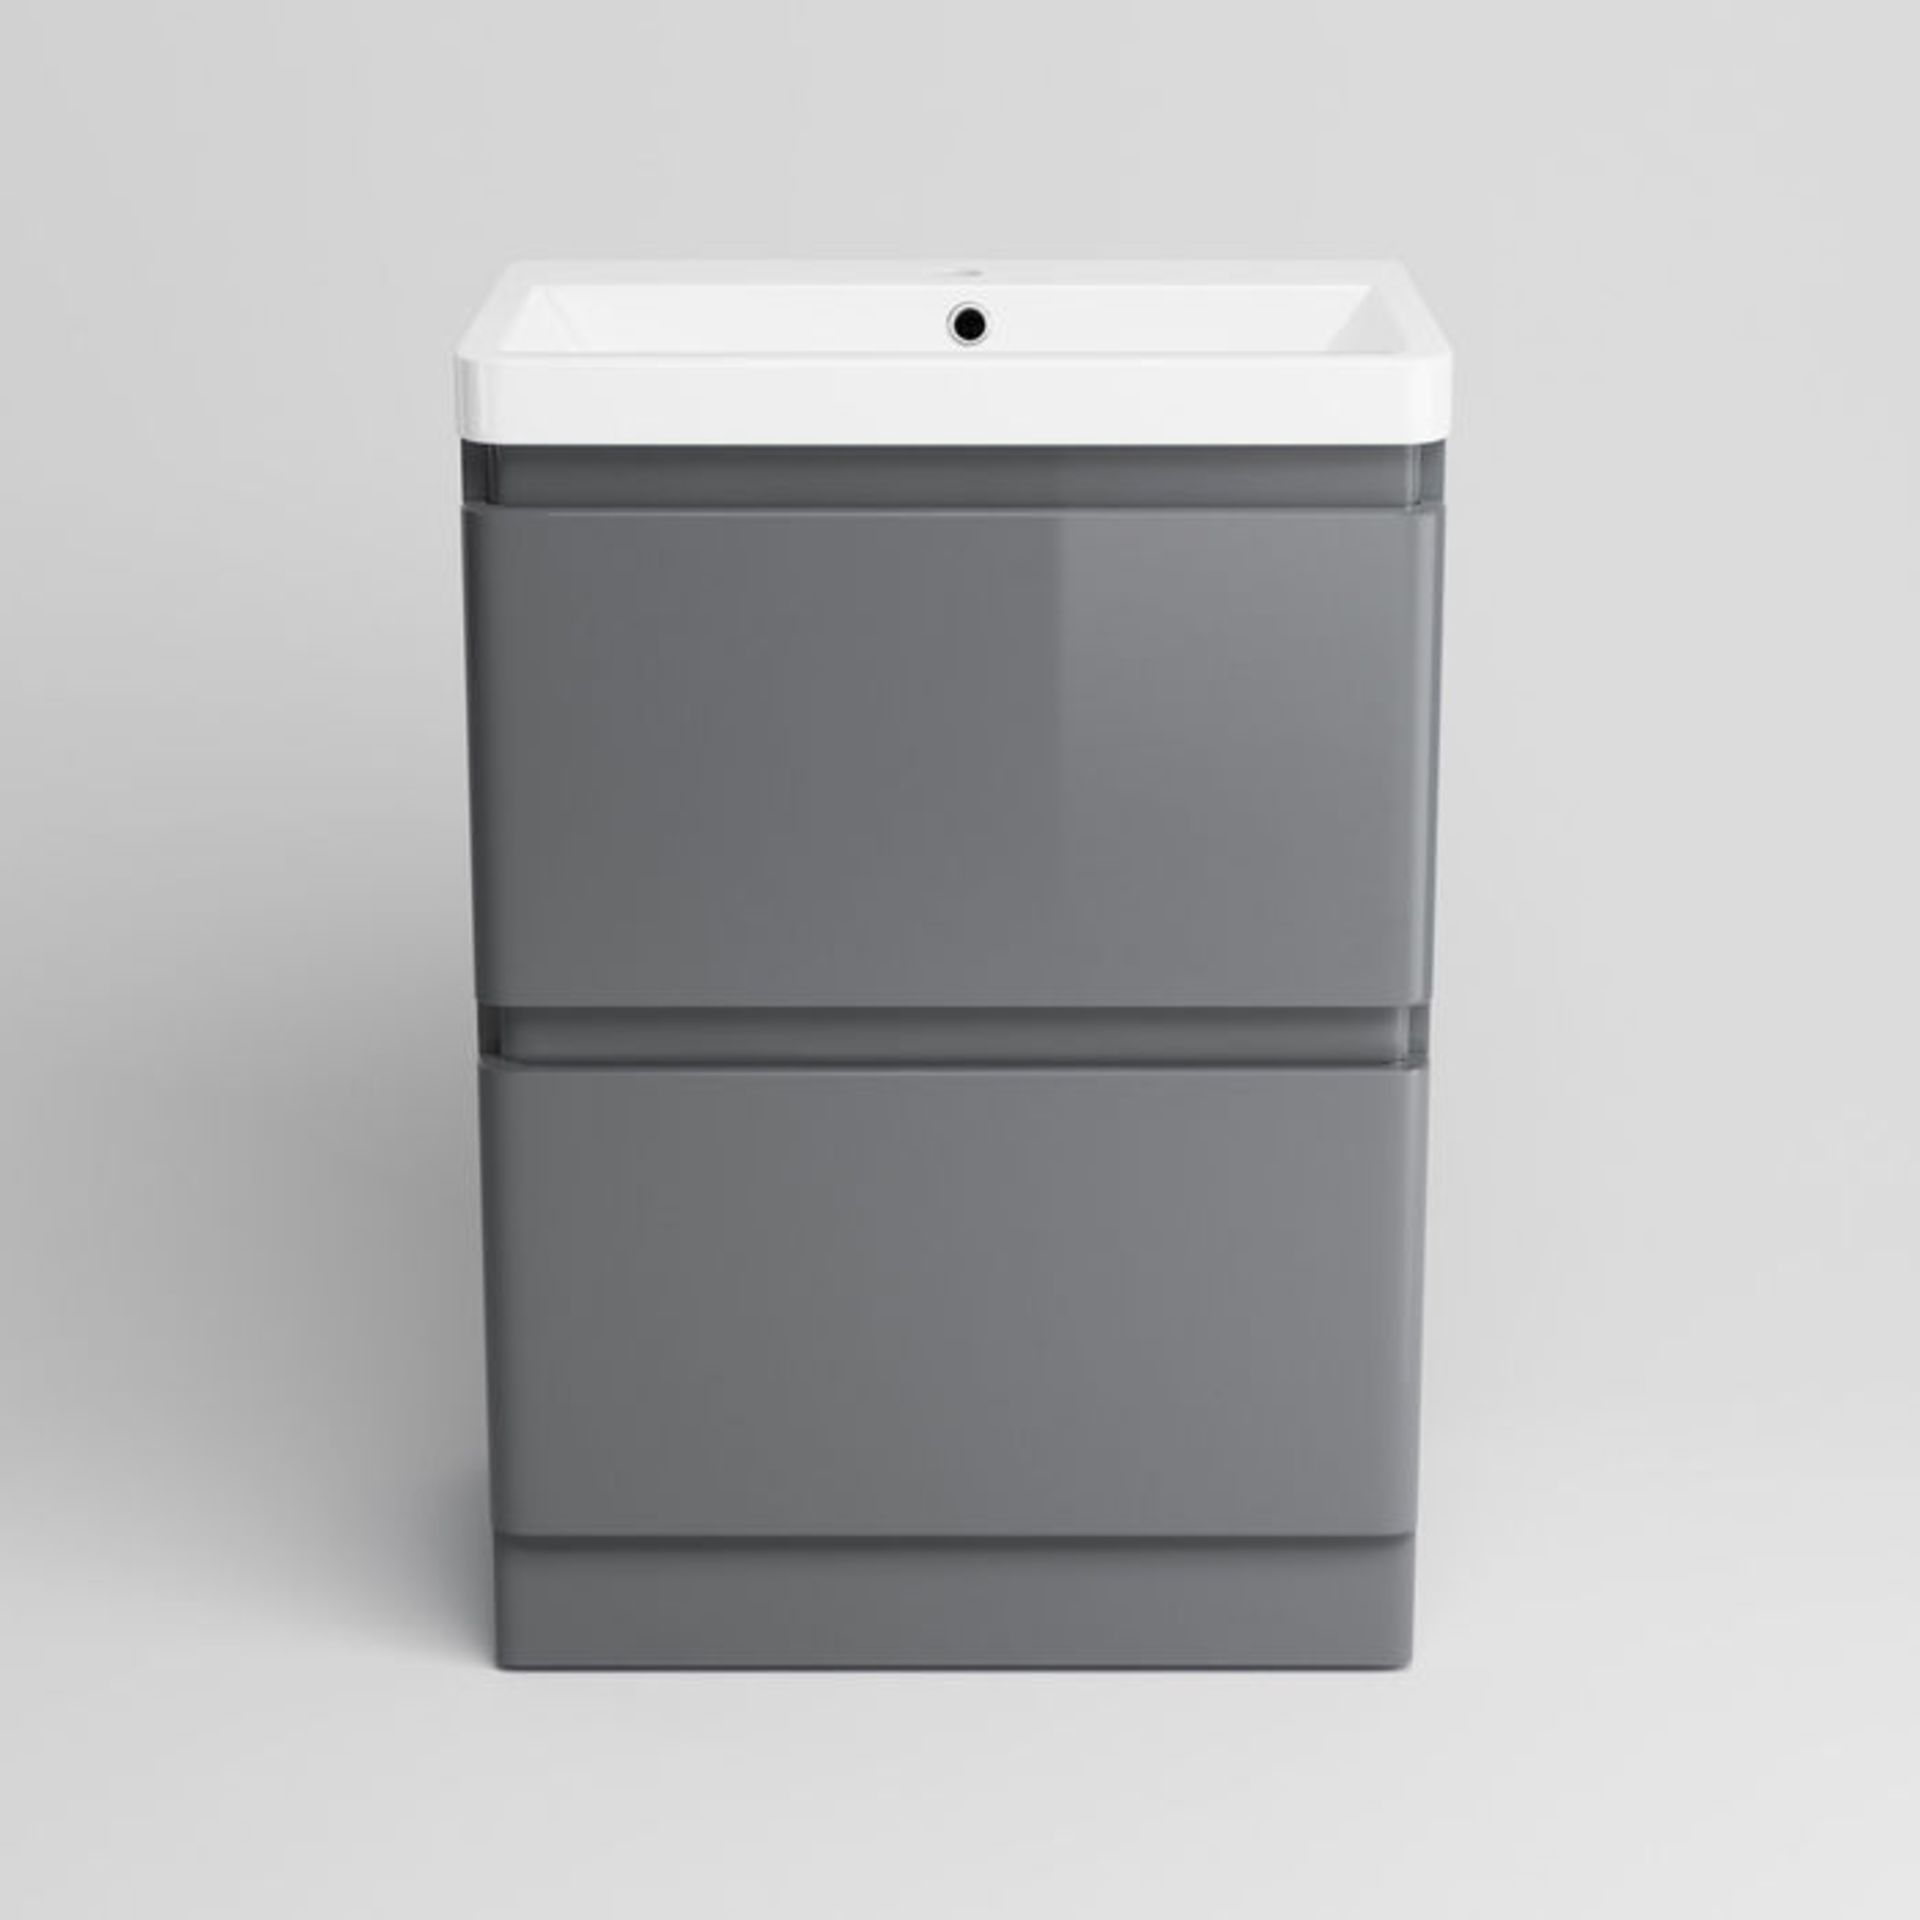 (XX3) 600mm Denver Gloss Grey Built In Sink Drawer Unit - Floor Standing. RRP £499.99. Comes c... - Image 4 of 4